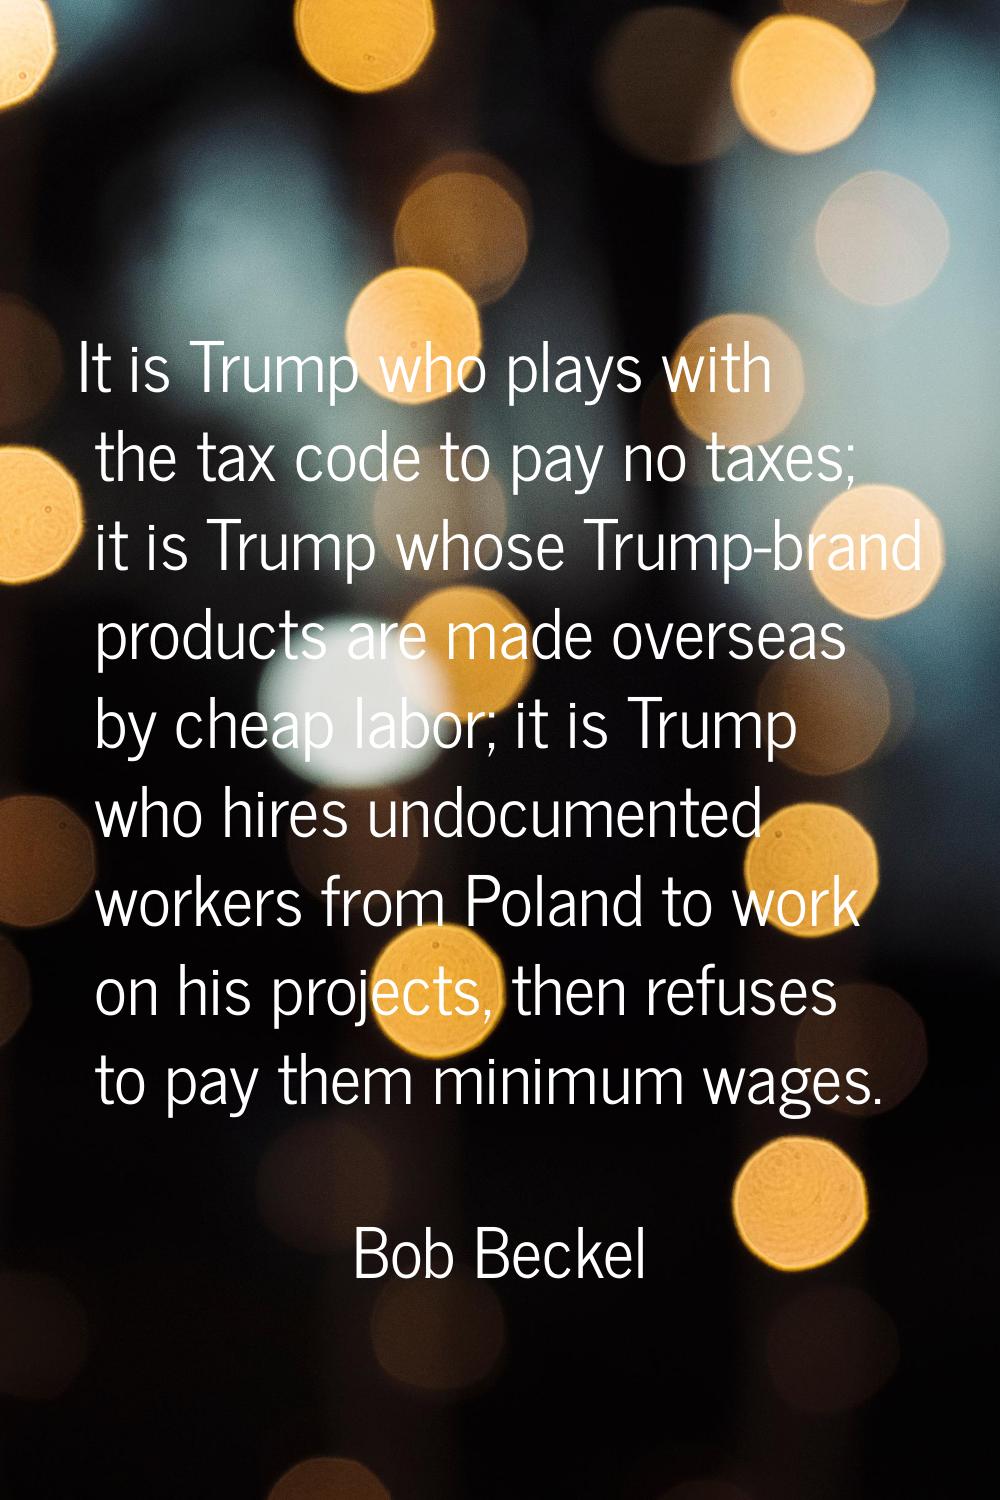 It is Trump who plays with the tax code to pay no taxes; it is Trump whose Trump-brand products are